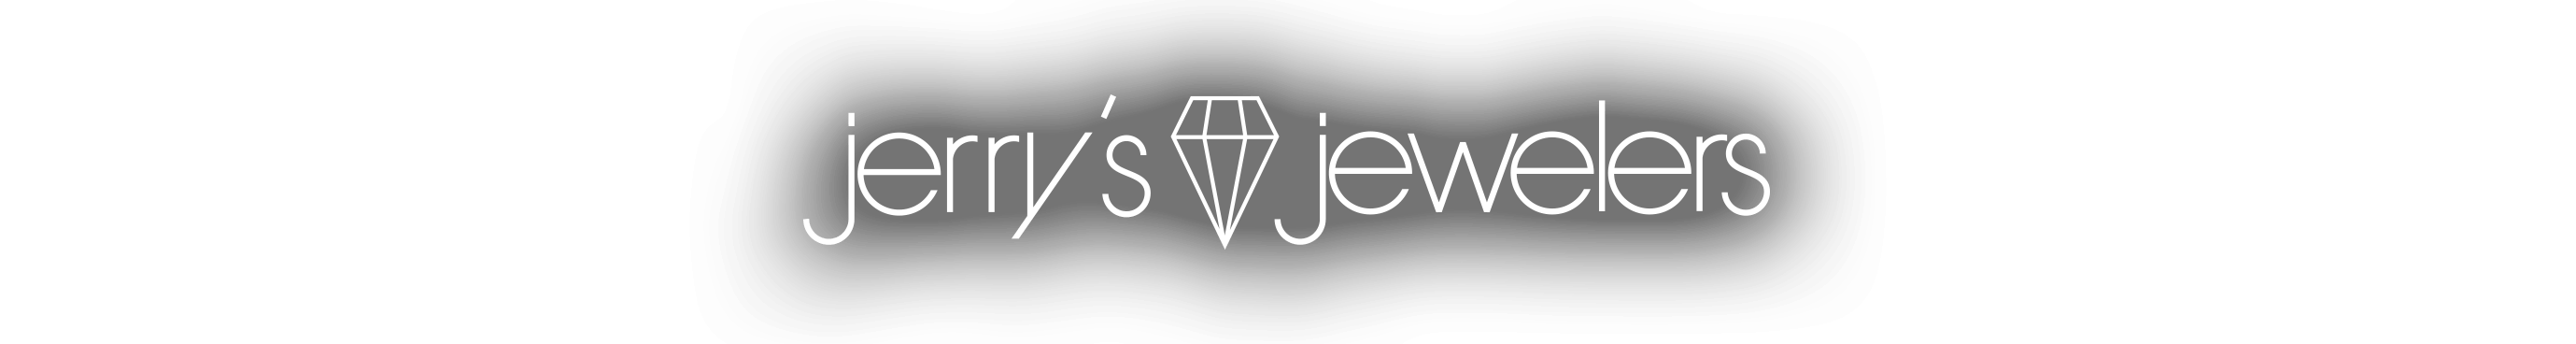 Jerry's Jewelers - Fine Jewelry and Repair In Rochester NY